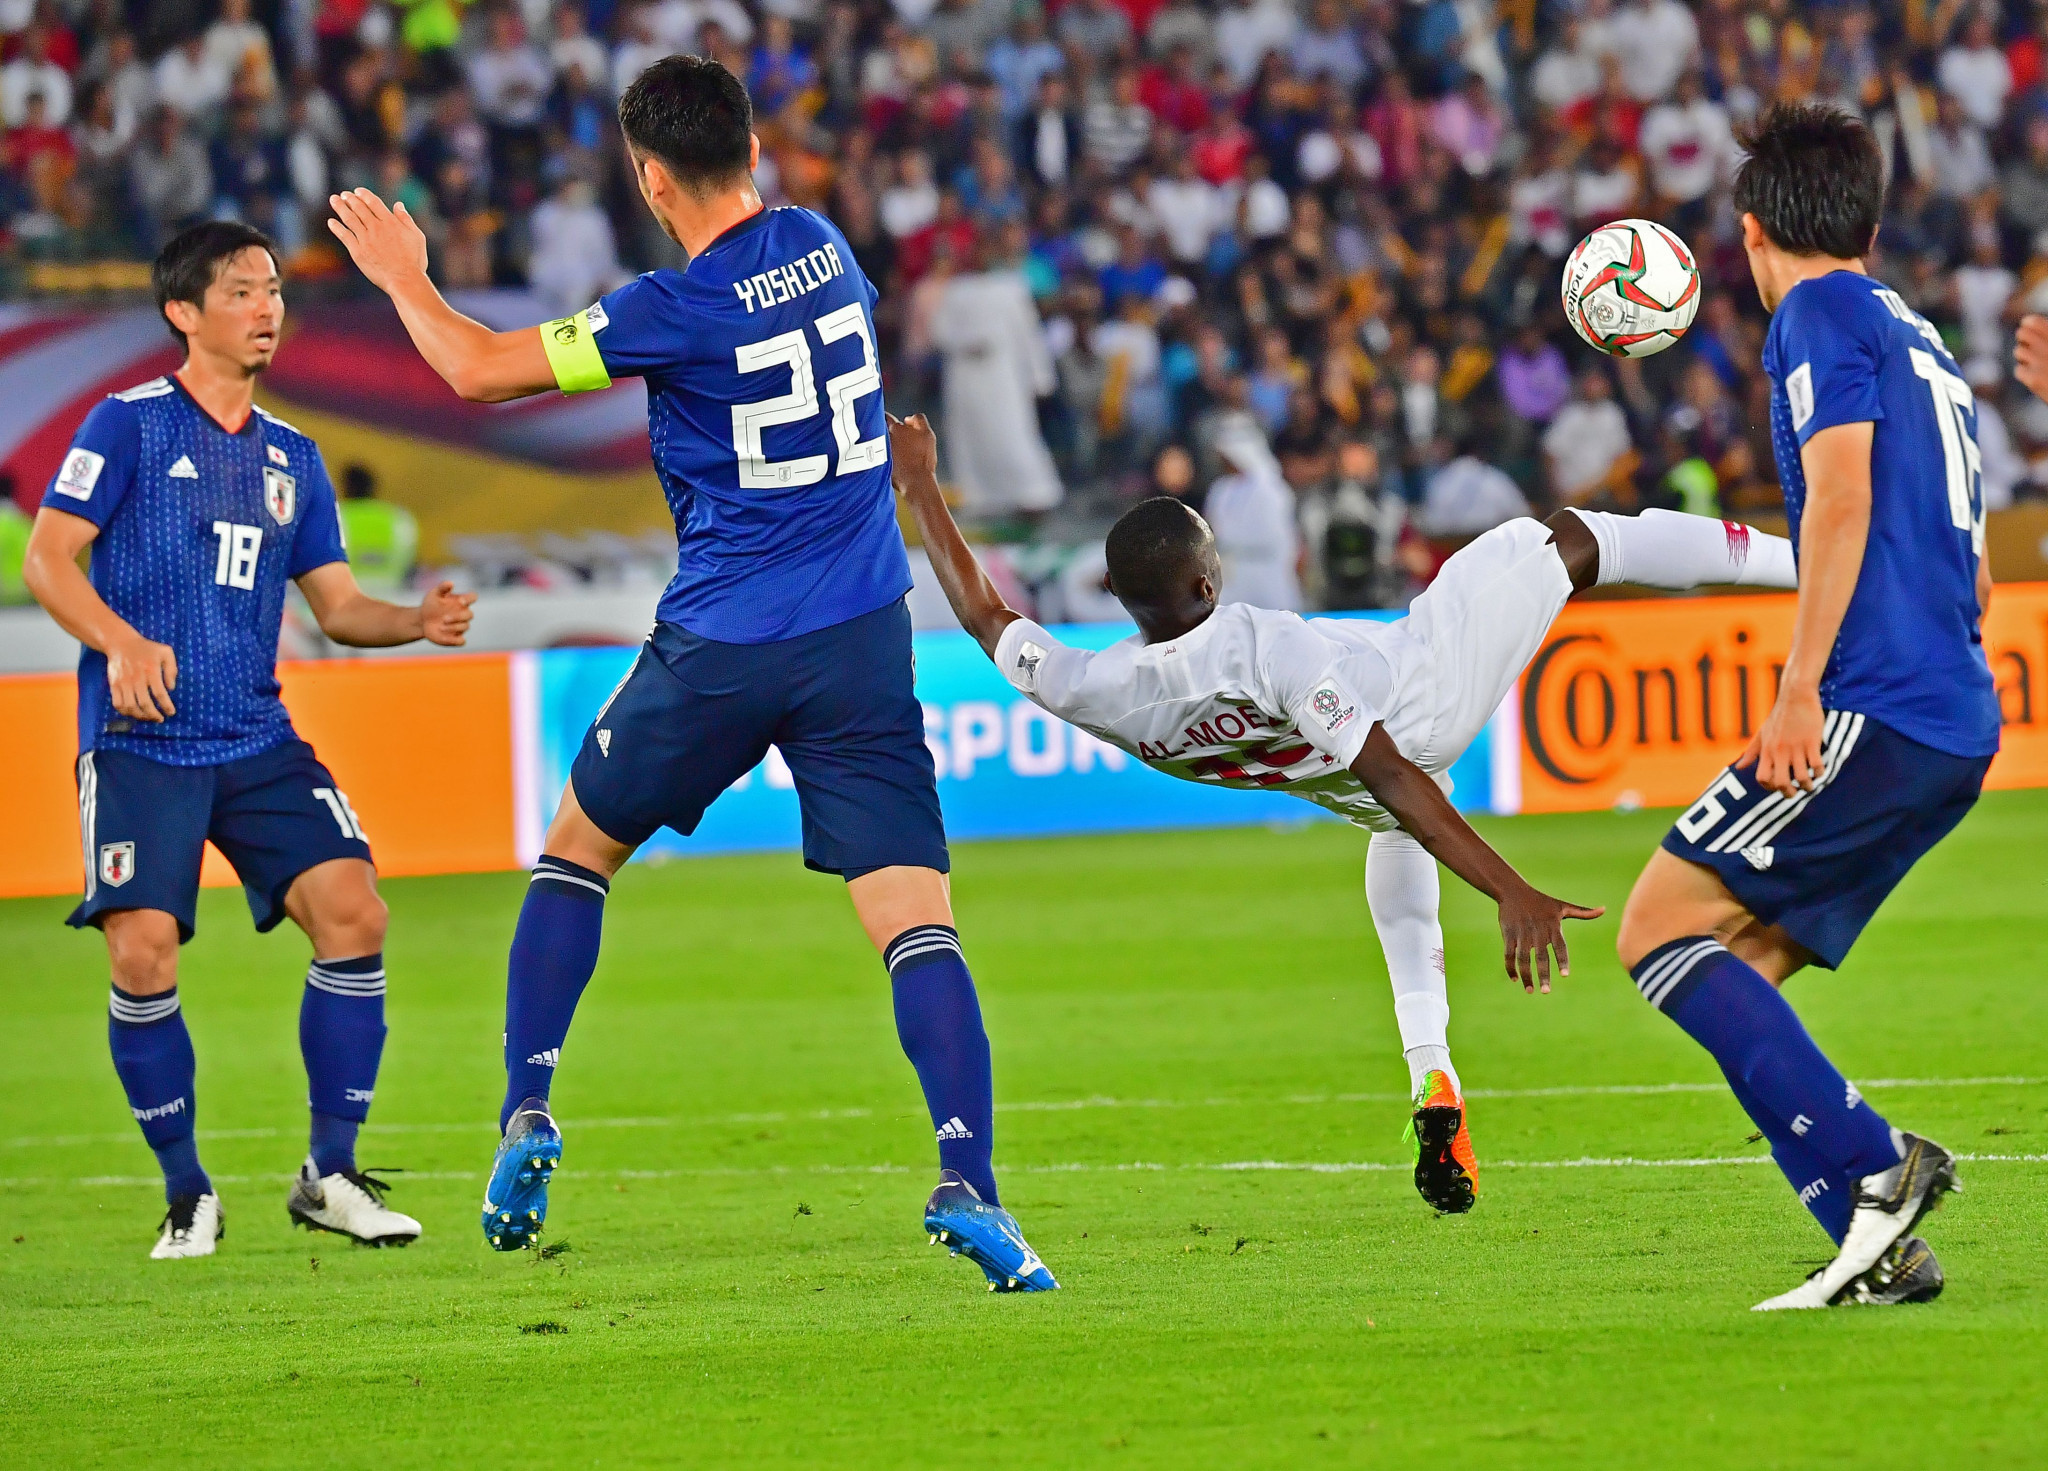 Almoez Ali's overhead kick was the stand-out moment of the final ©Getty Images